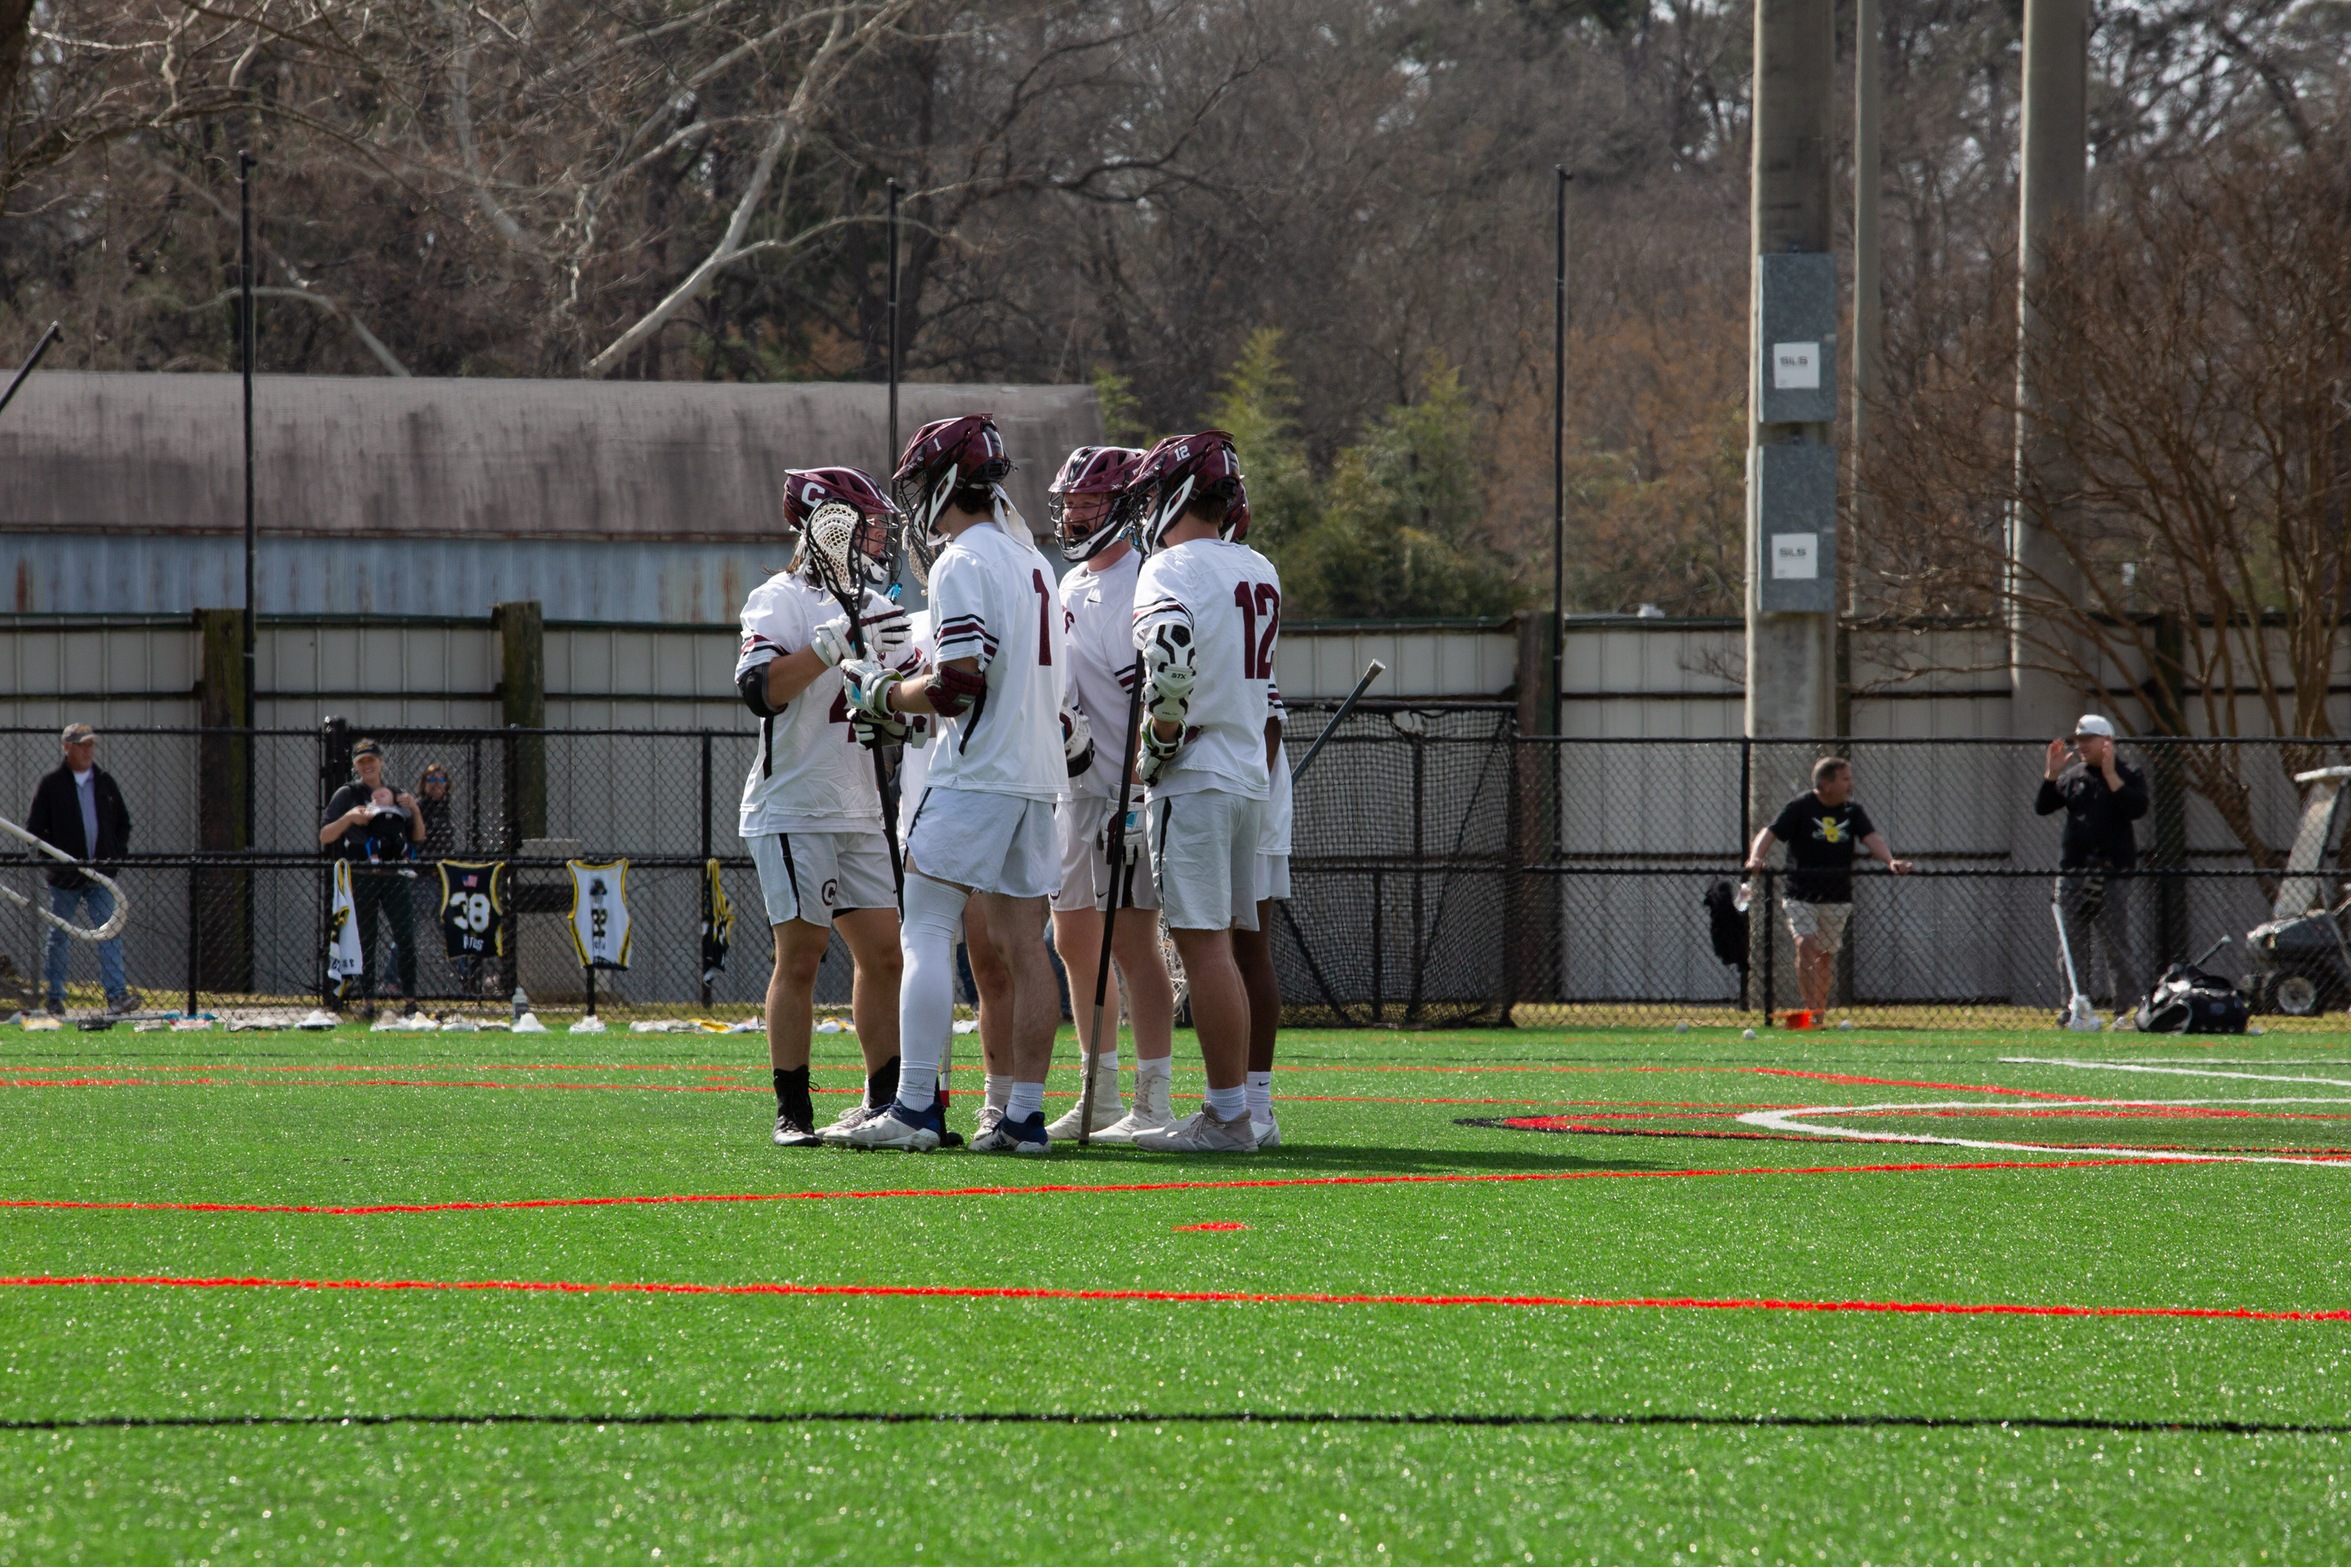 The Gents won their second in a row with an 11-7 win at Earlham College on Saturday.